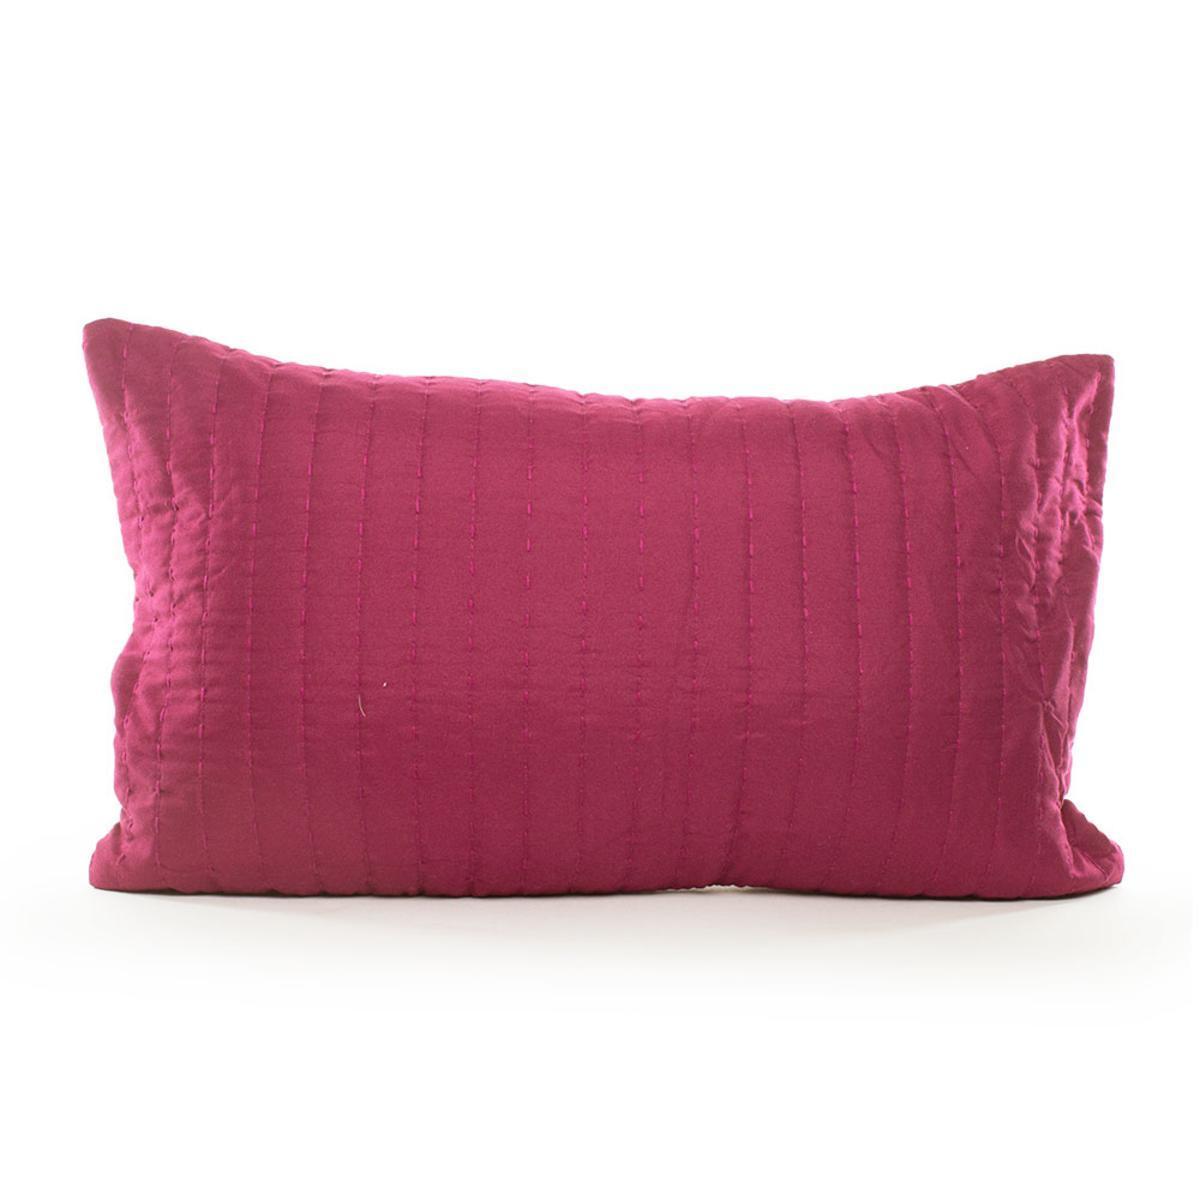 COUSSIN LILI CASSIS 30X50